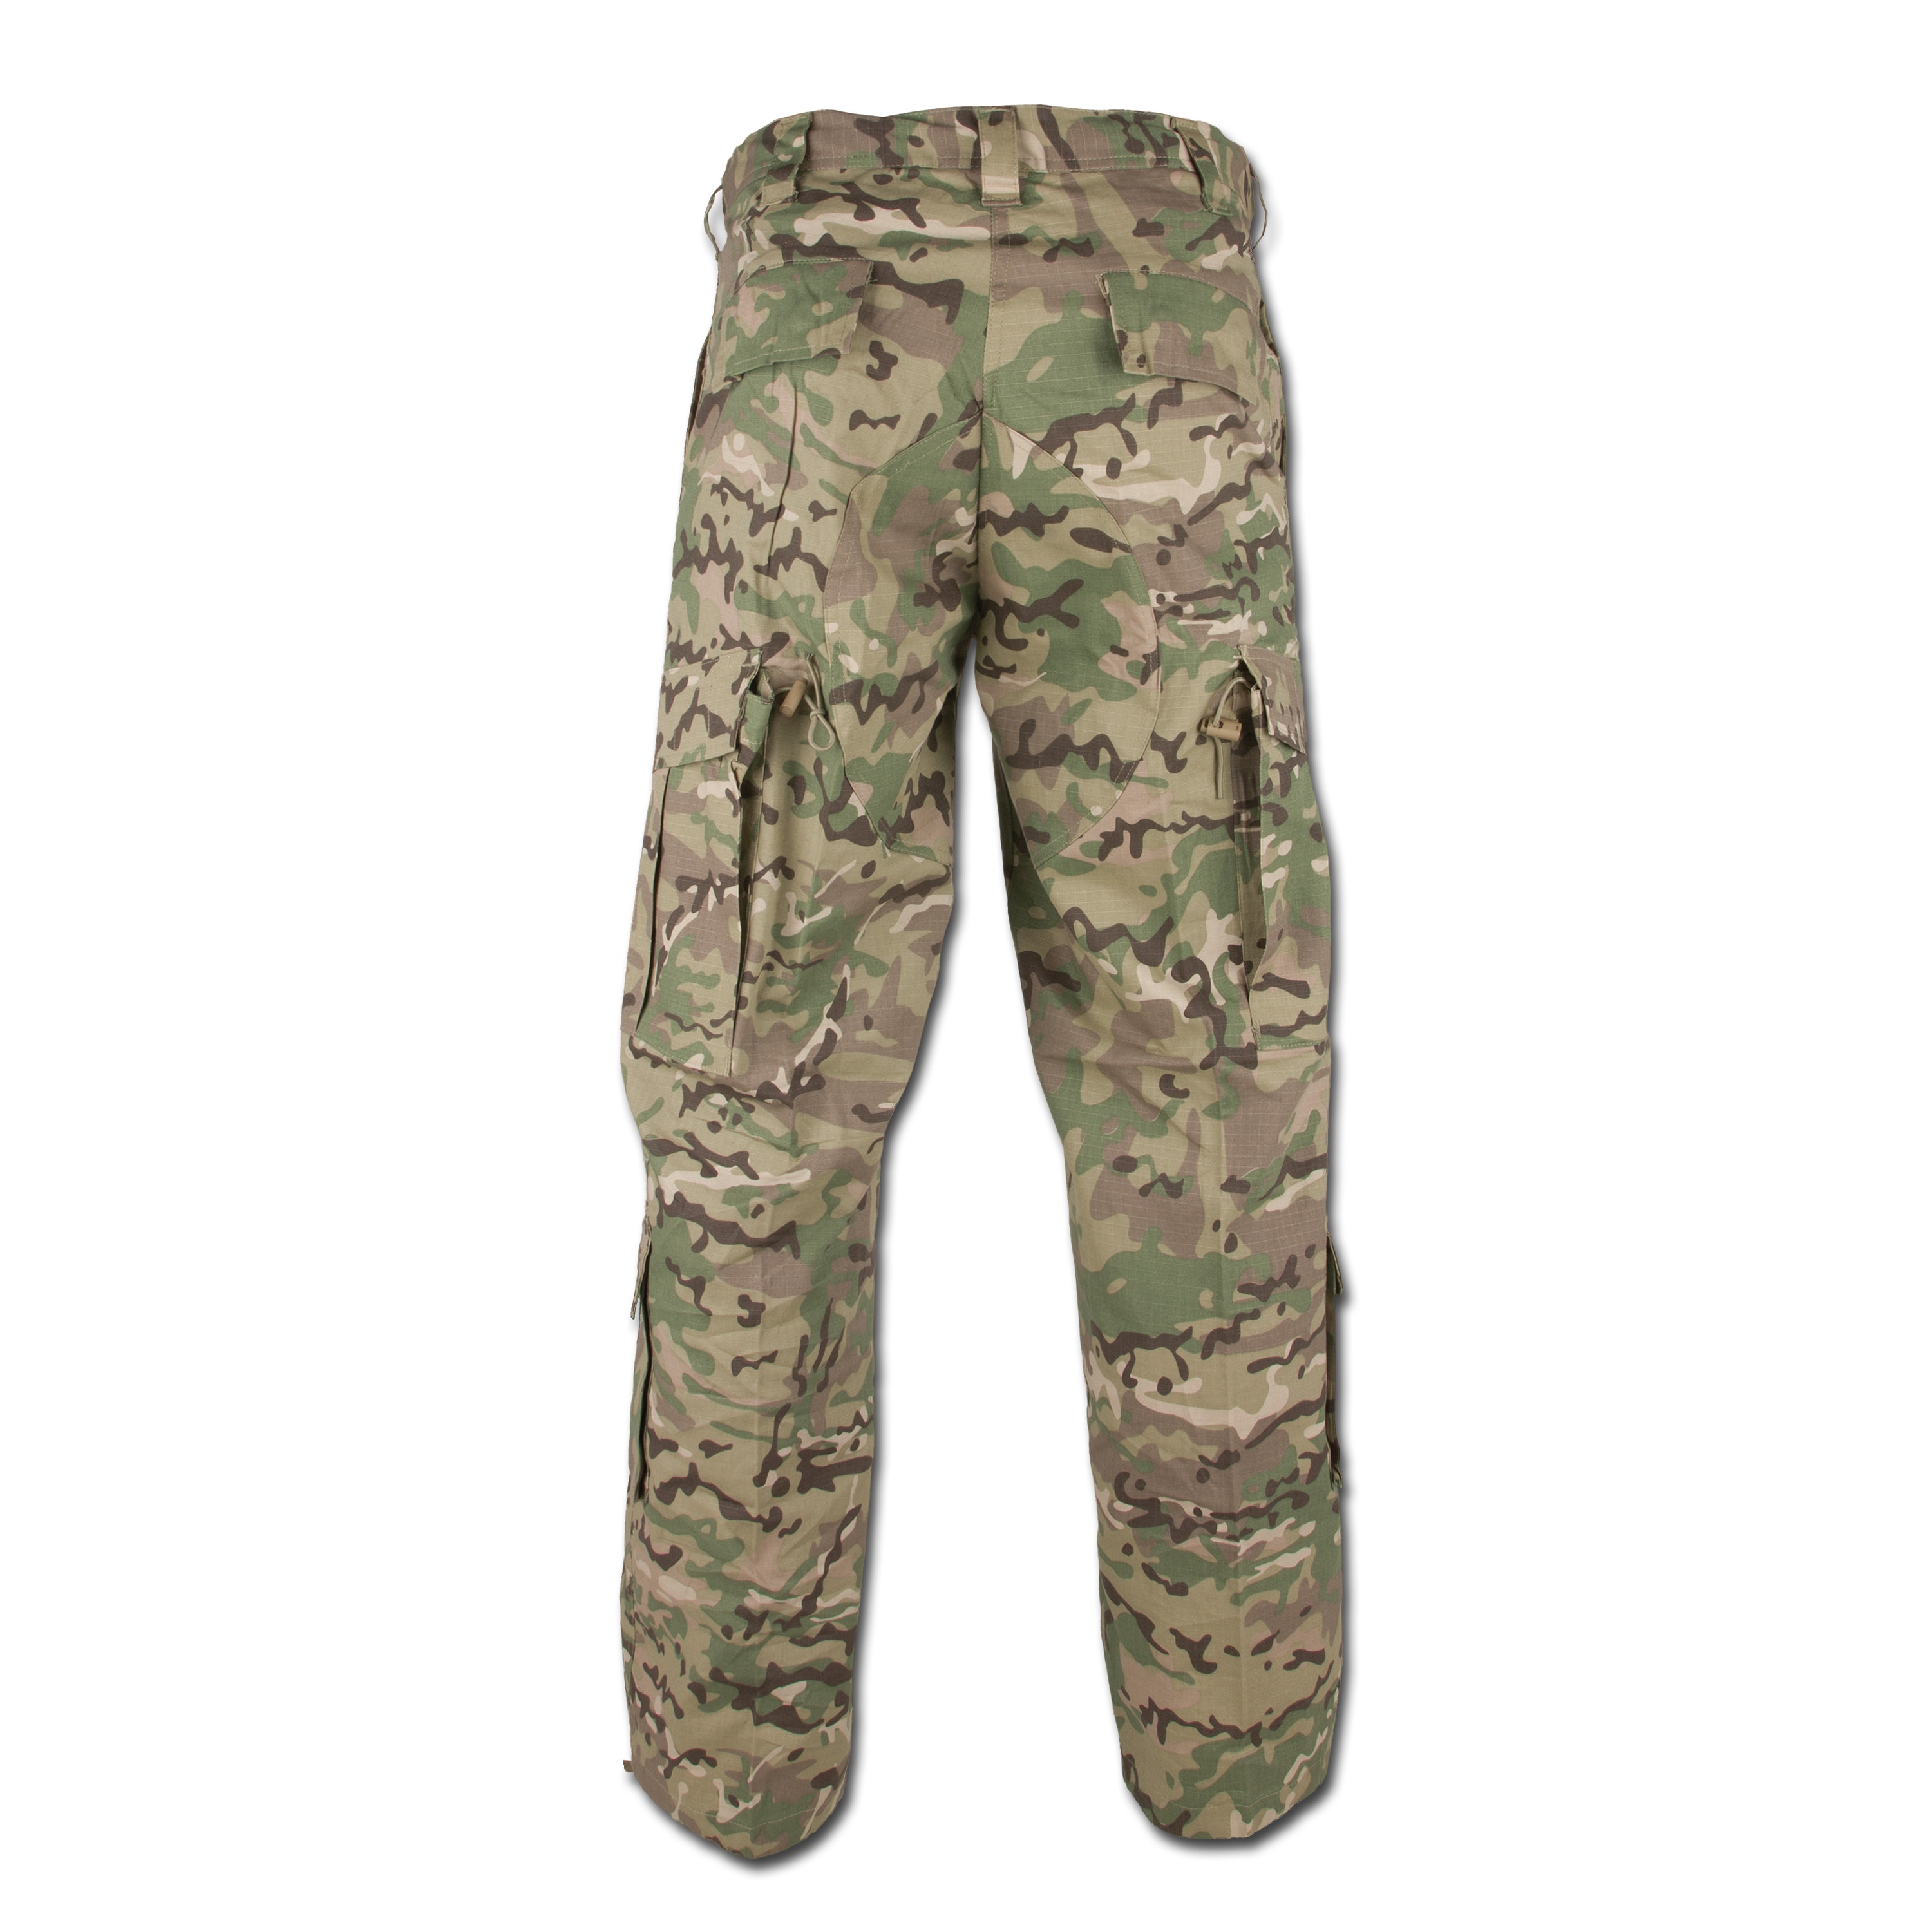 Purchase the Field Pants ACU operation-camo by ASMC